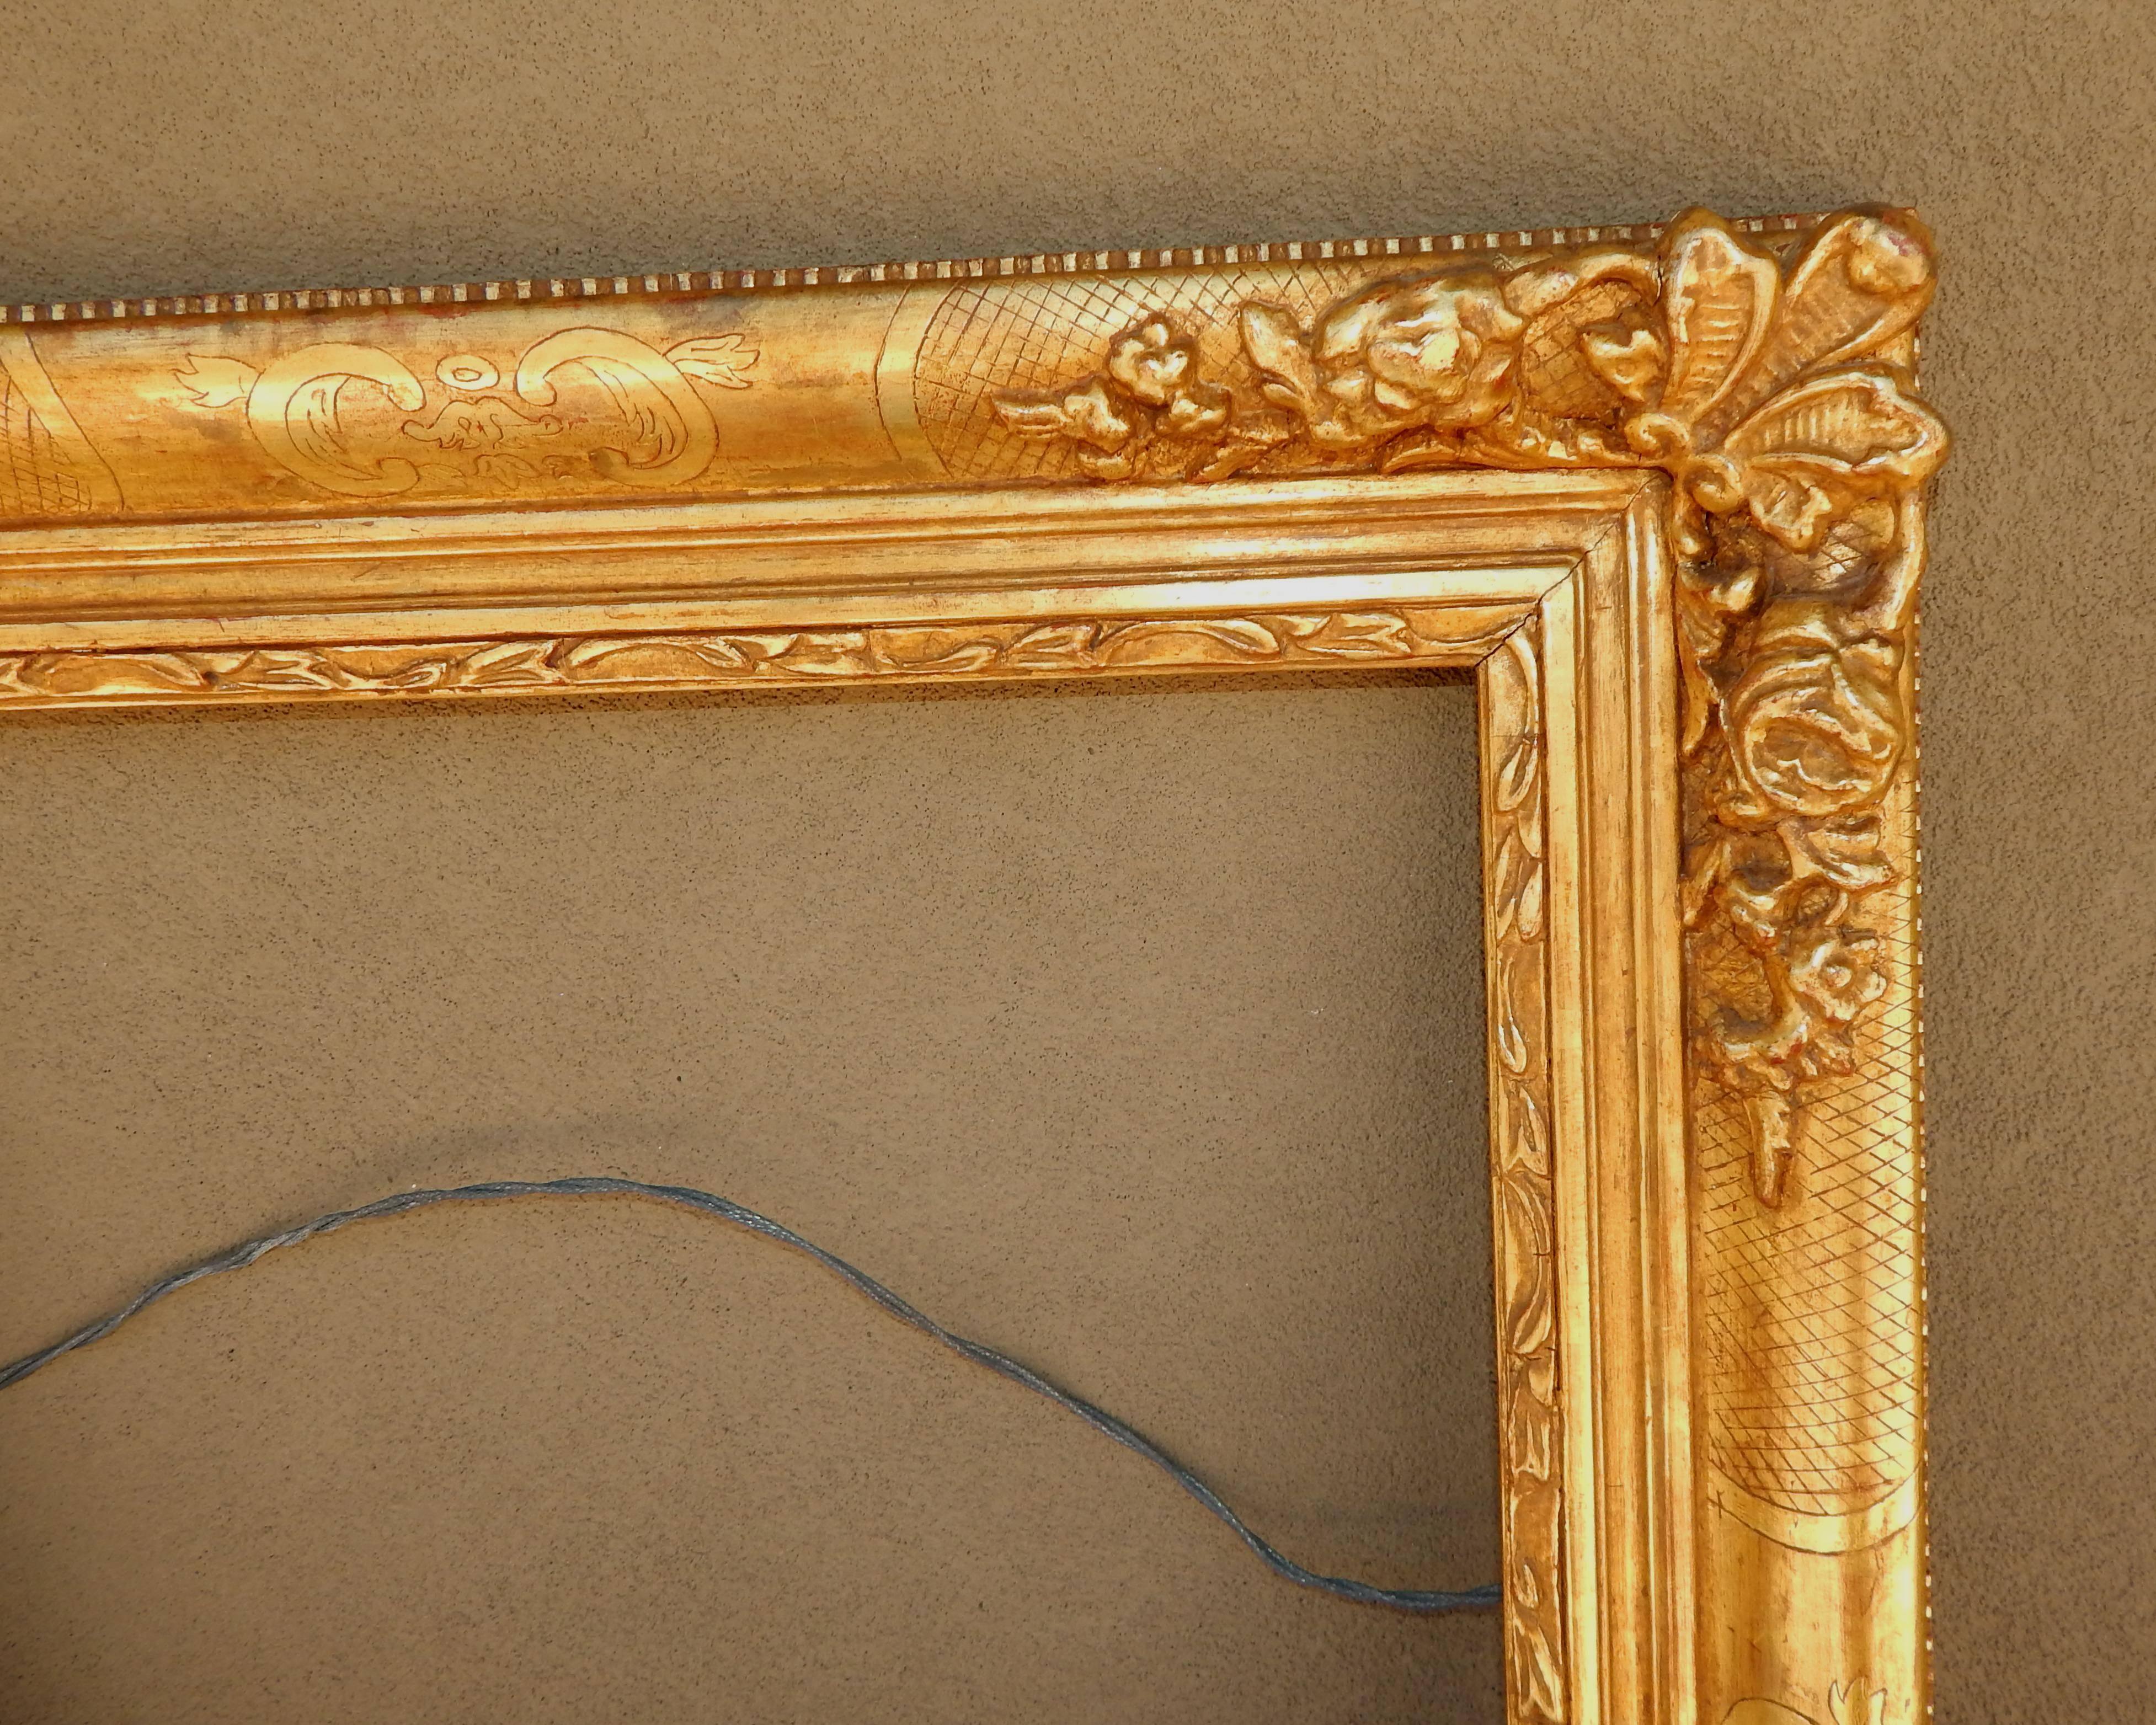 Beautiful carved frame by one of America's finest frame makers, Richard Tobey.
In mint condition. Marked 